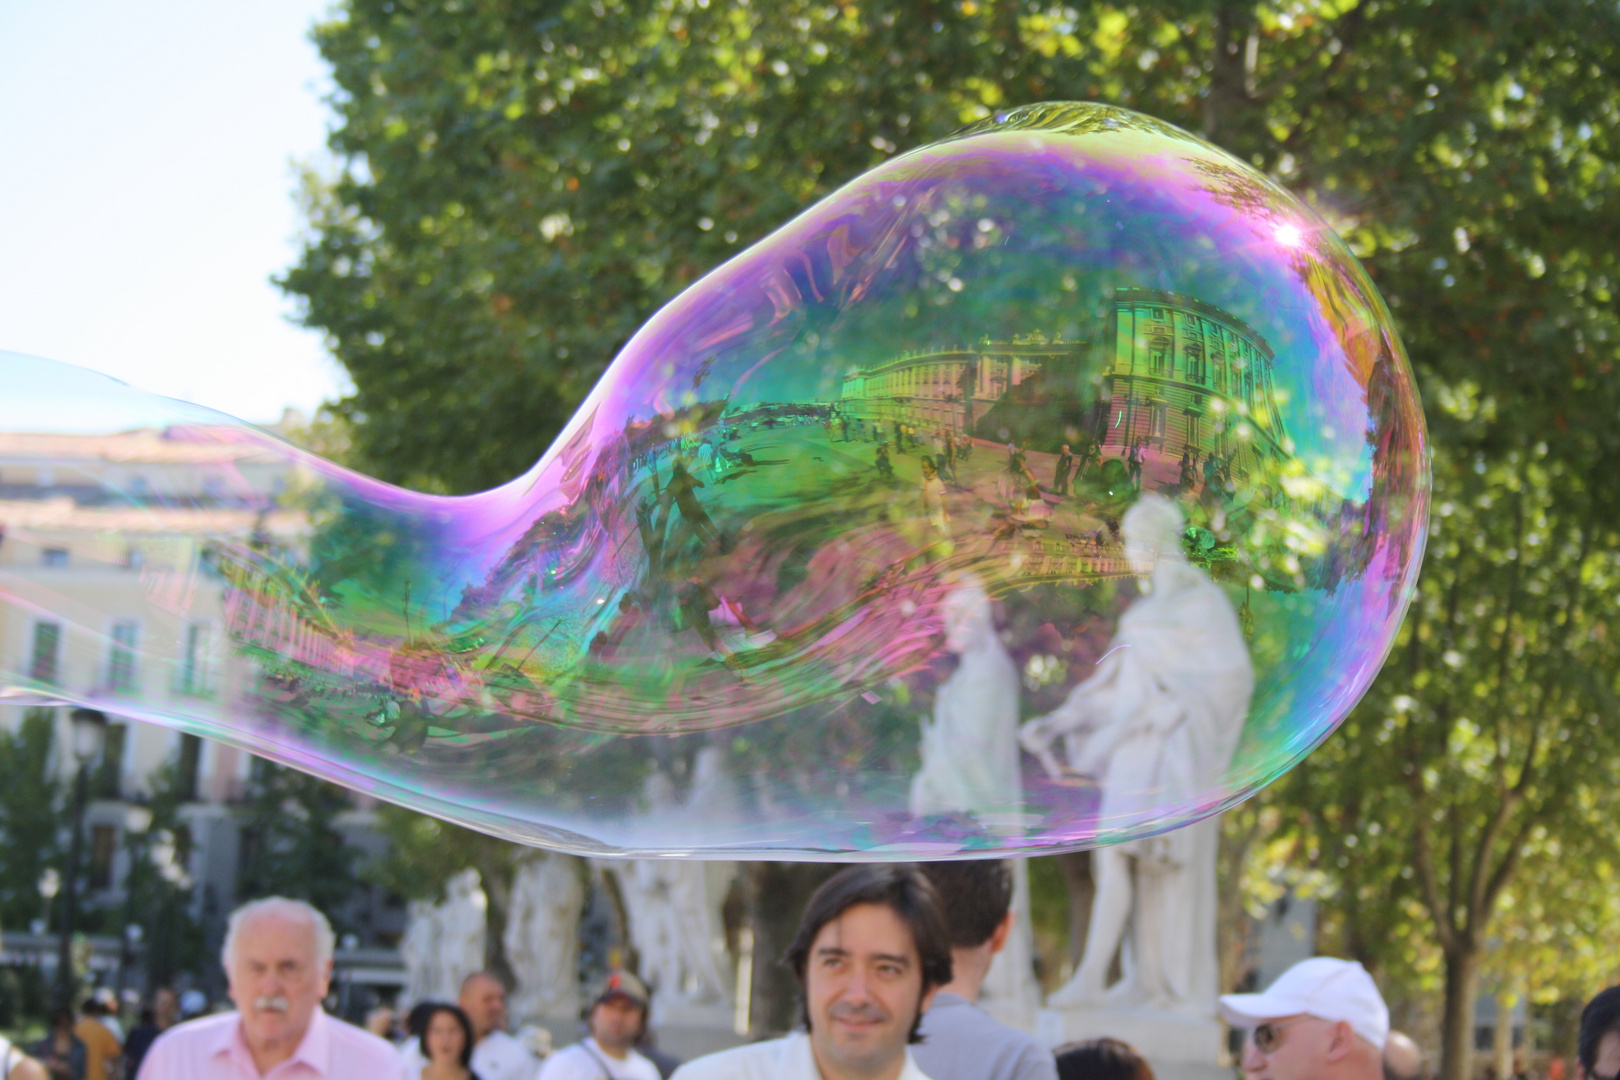 Where is this bubble floating?